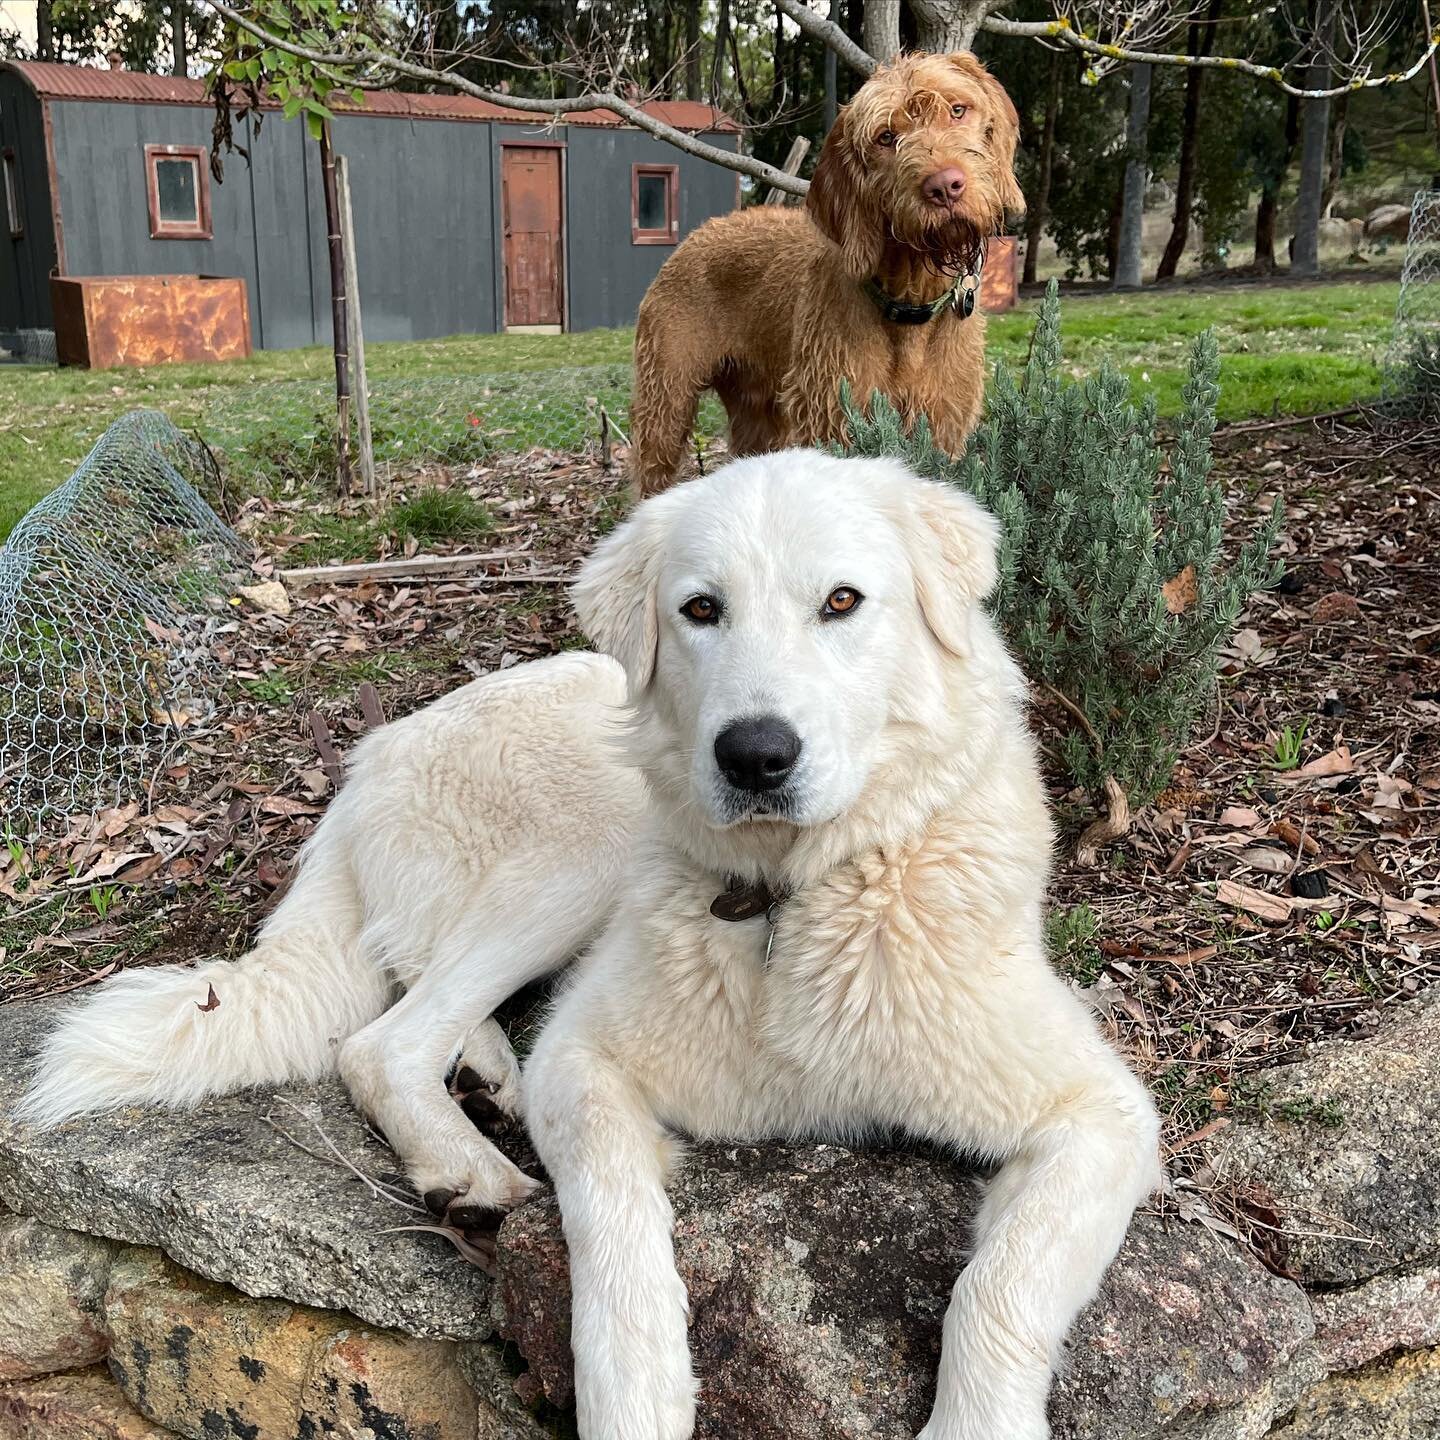 Neve our magnificent maremma and Hank our cheeky wire haired vizsla pup overseeing wood chopping duties #farmpupfriday #maremmasheepdog #wirehairedvizsla